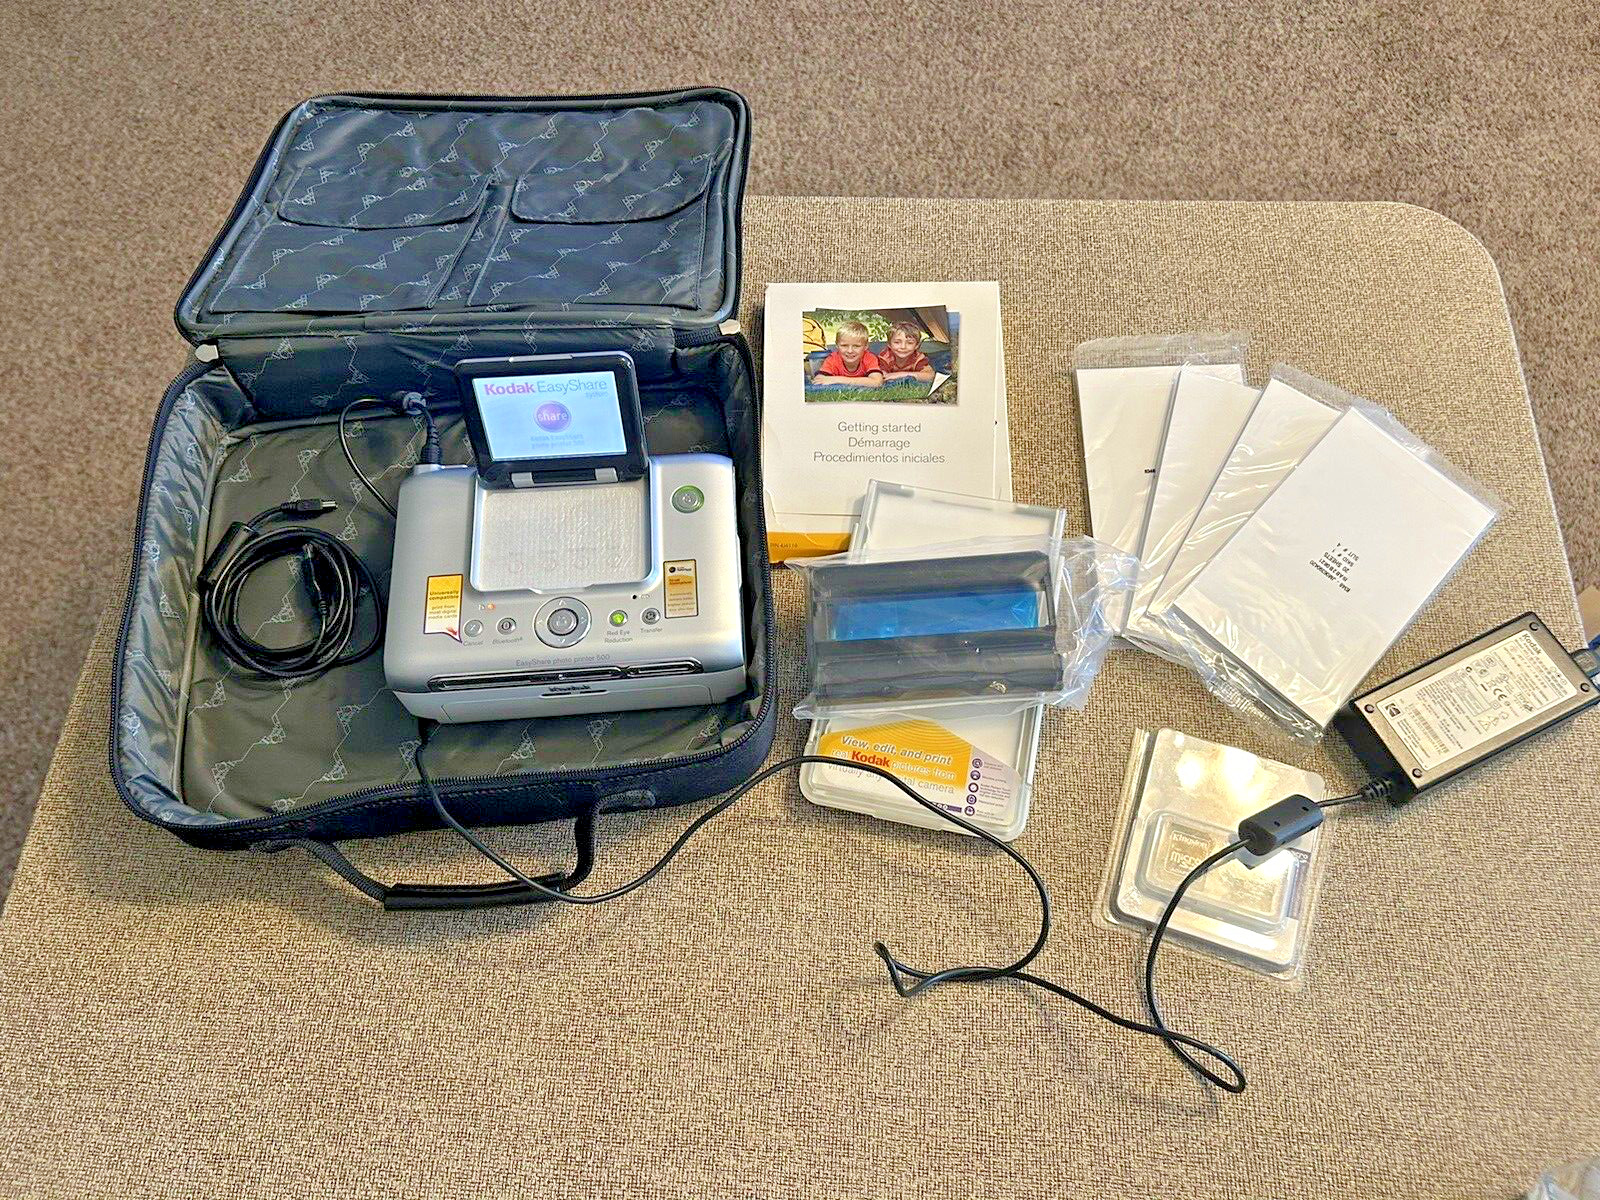 Kodak Easyshare Photo Printer 500 with extras. Powers on but untested